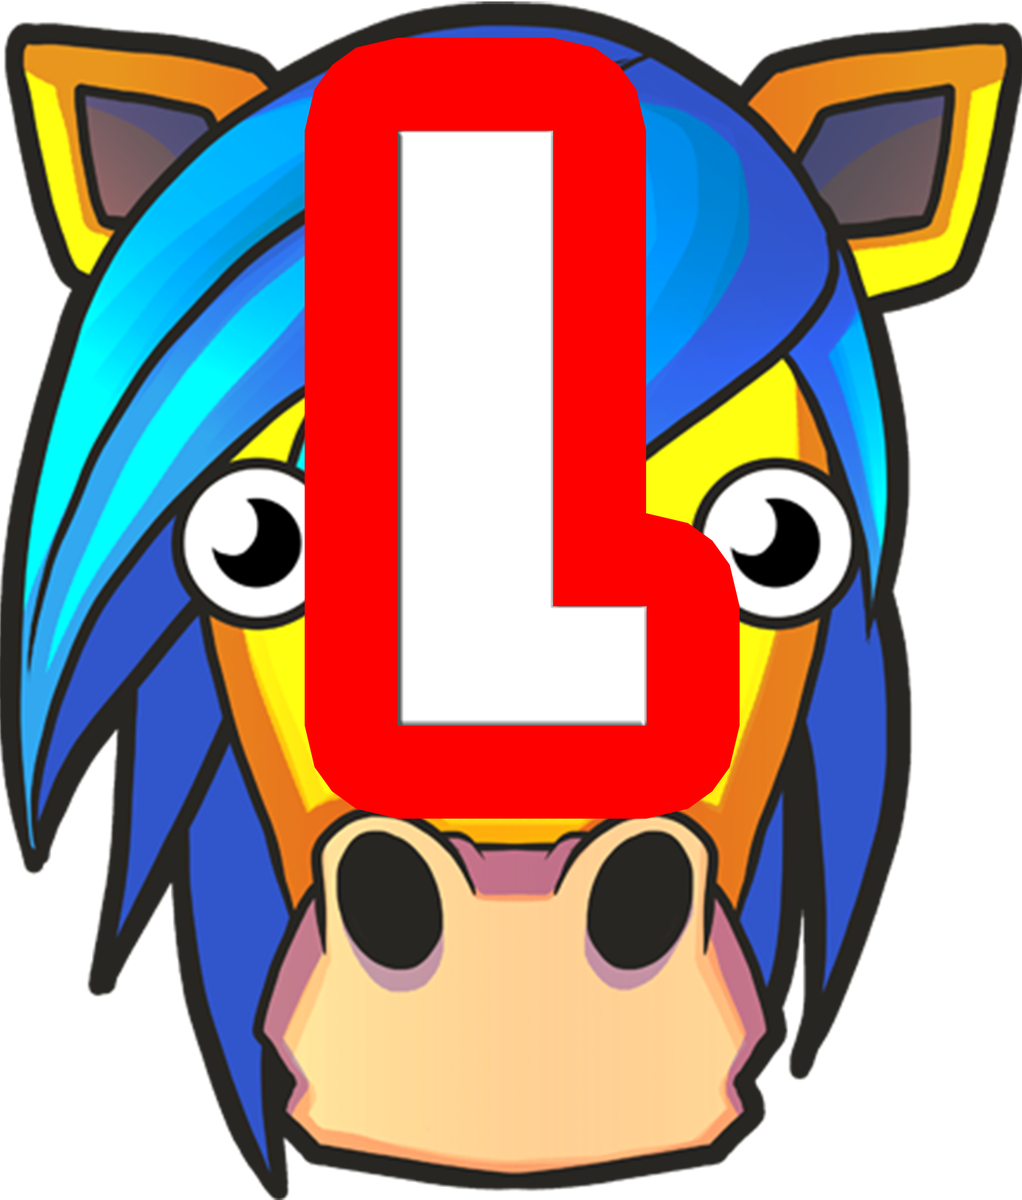 Myusernamesthis Use Code Bacon On Twitter I Could Make This Into A Temporary Tattoo For Him - myusernamesthis l horse roblox